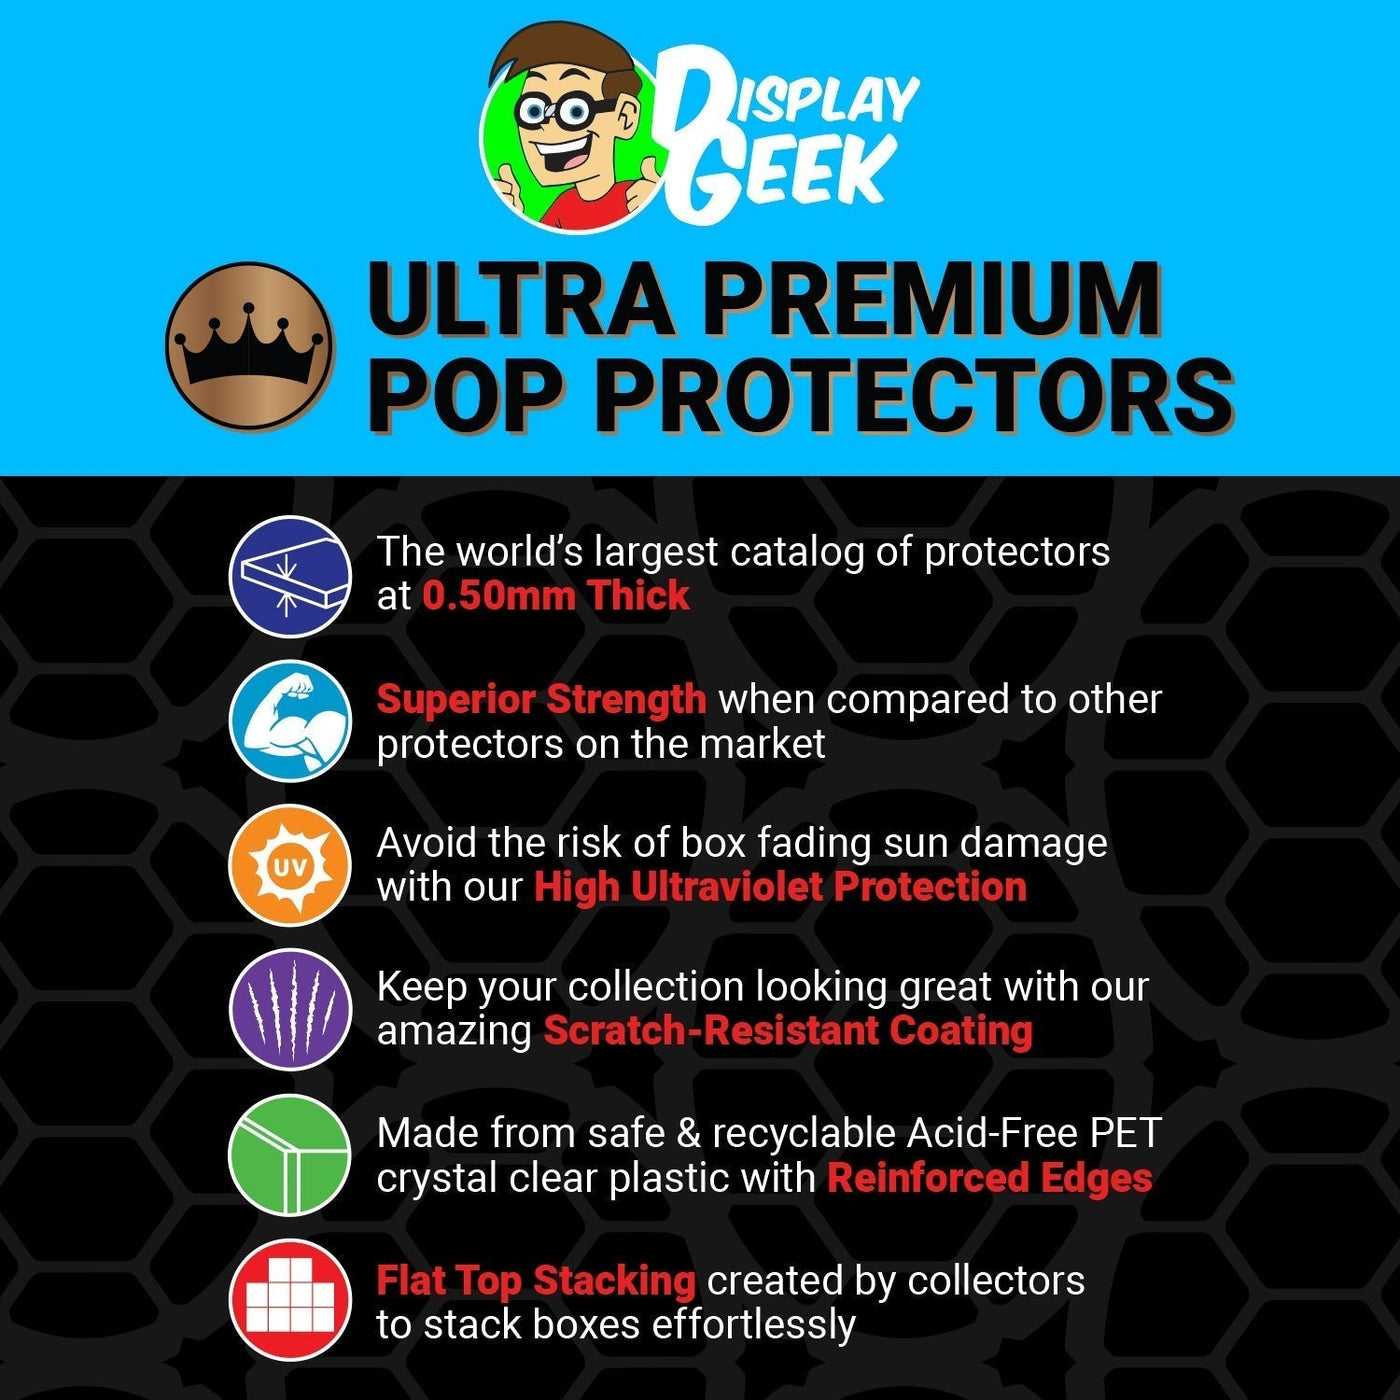 Pop Protector for 6 inch Godzilla #239 Super Funko Pop on The Protector Guide App by Display Geek